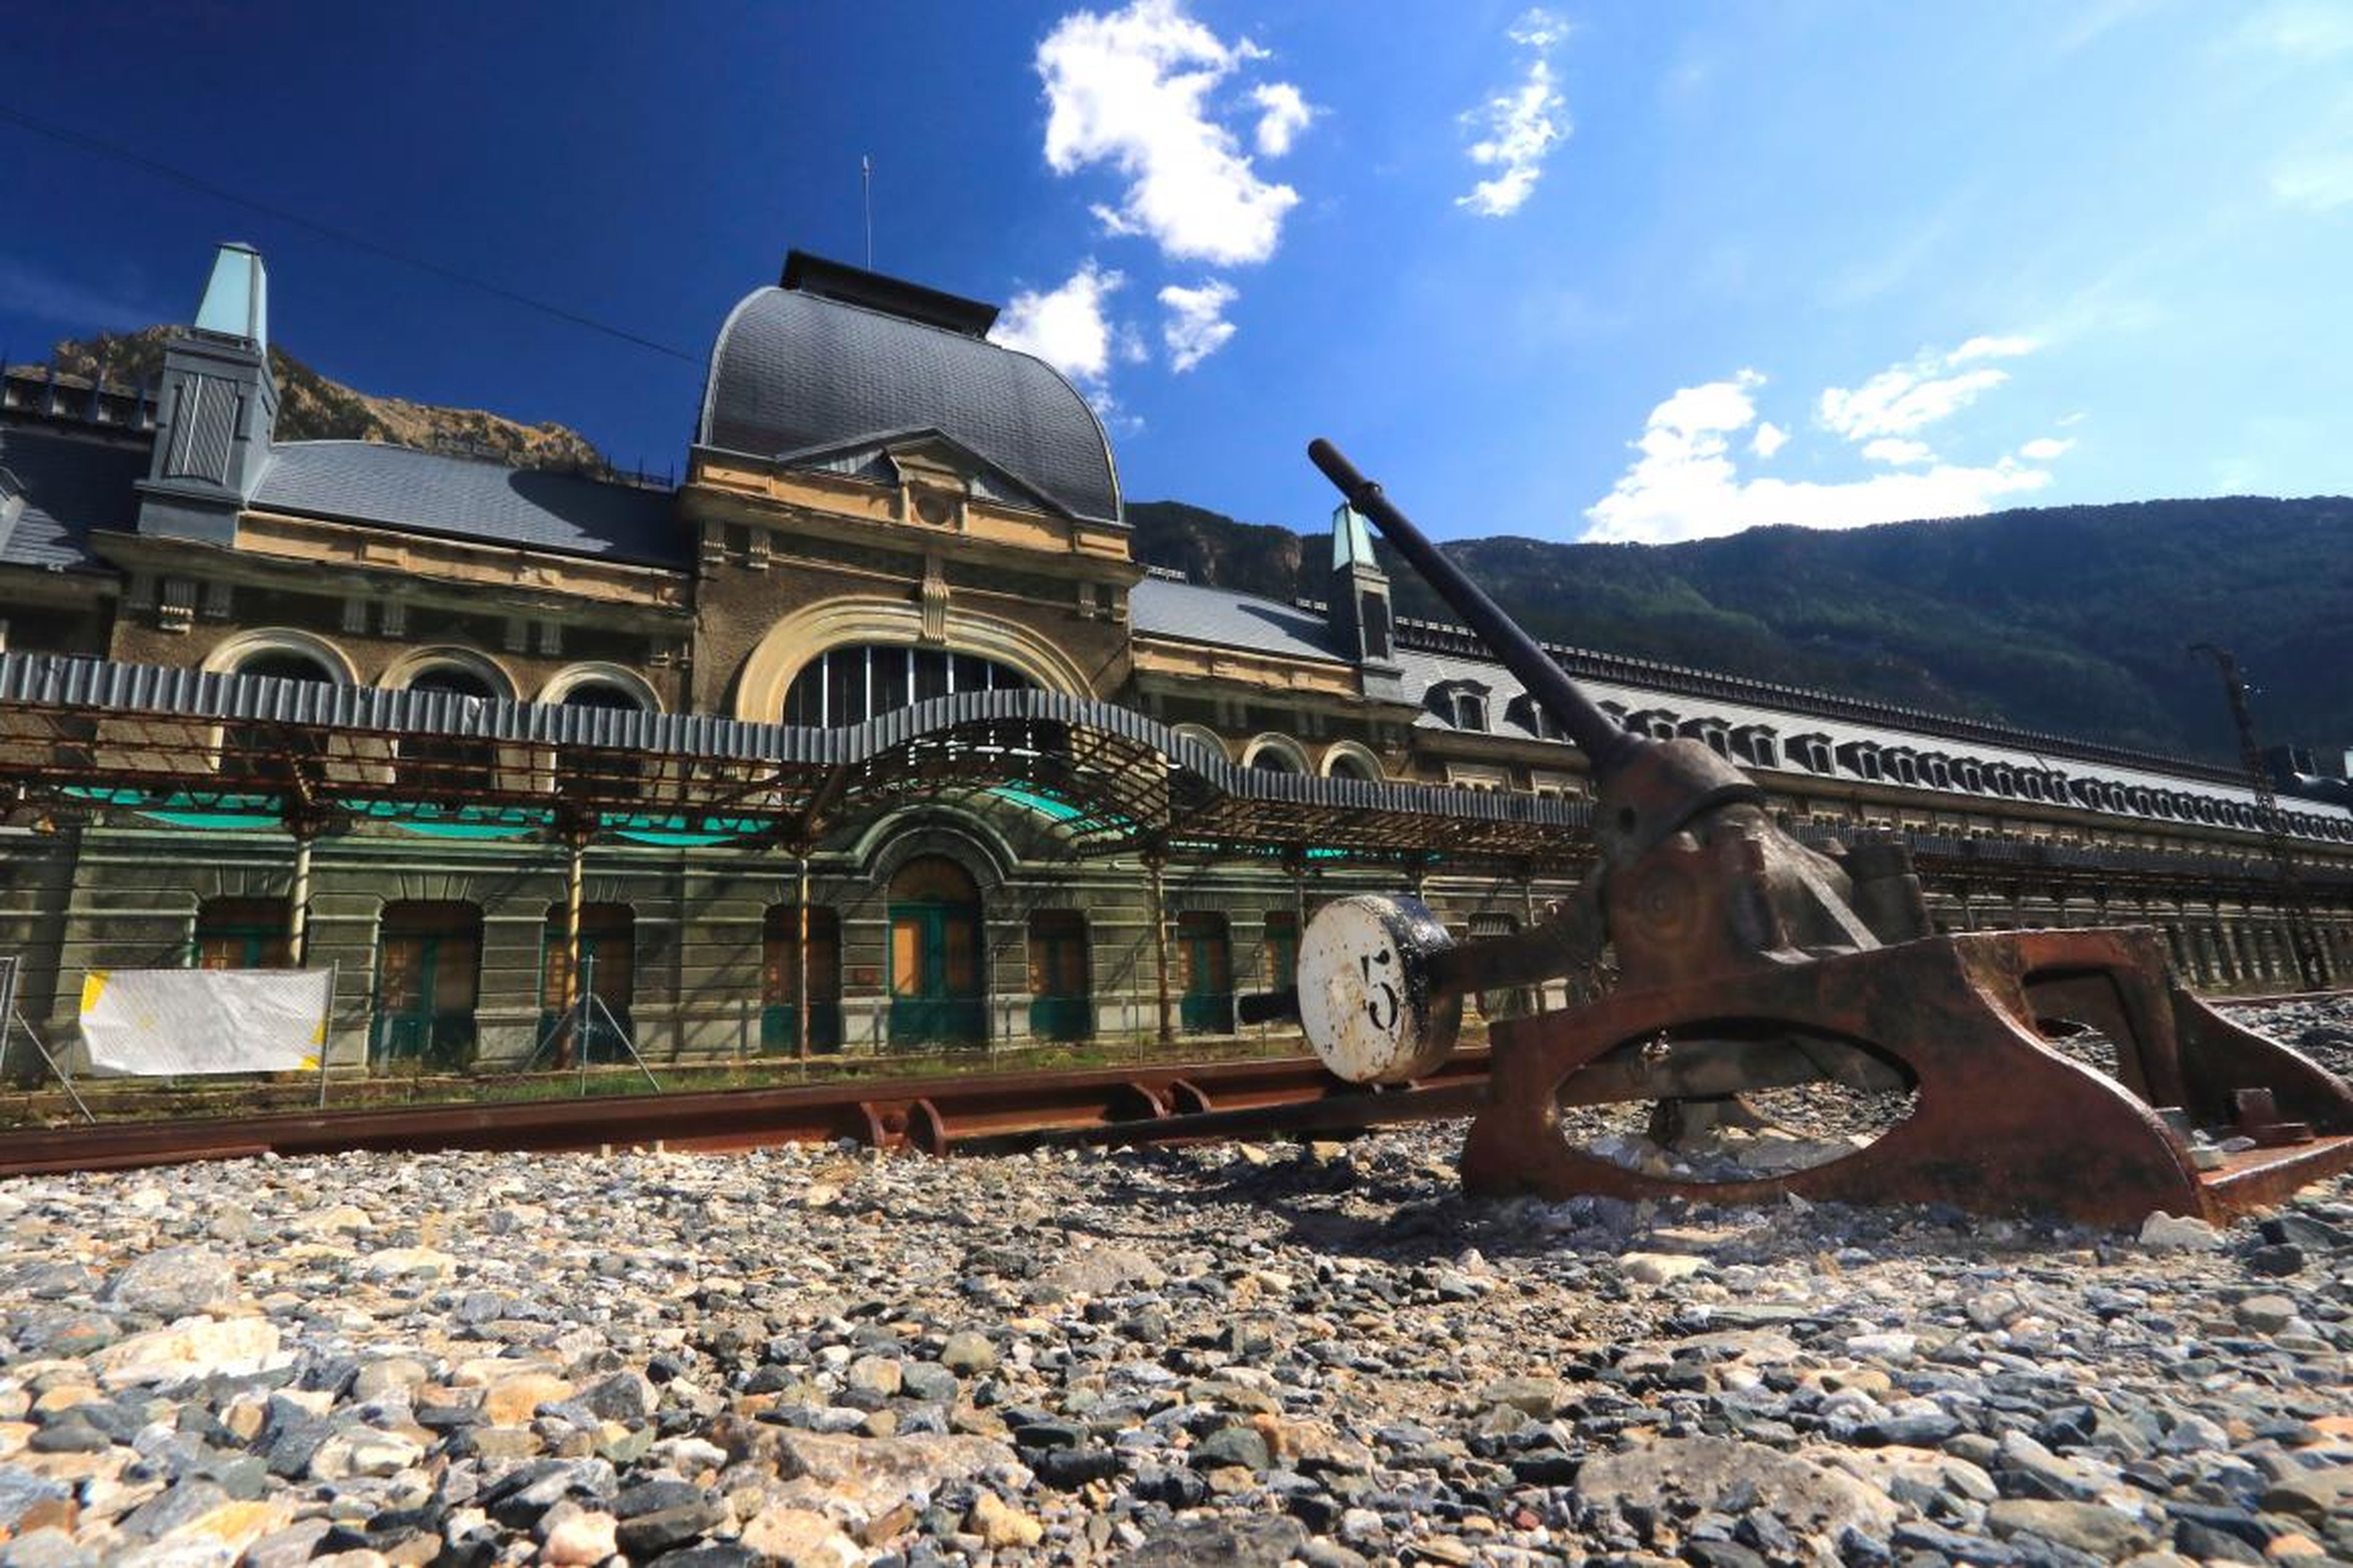 Canfranc was once the biggest train station in Europe upon opening in 1928.